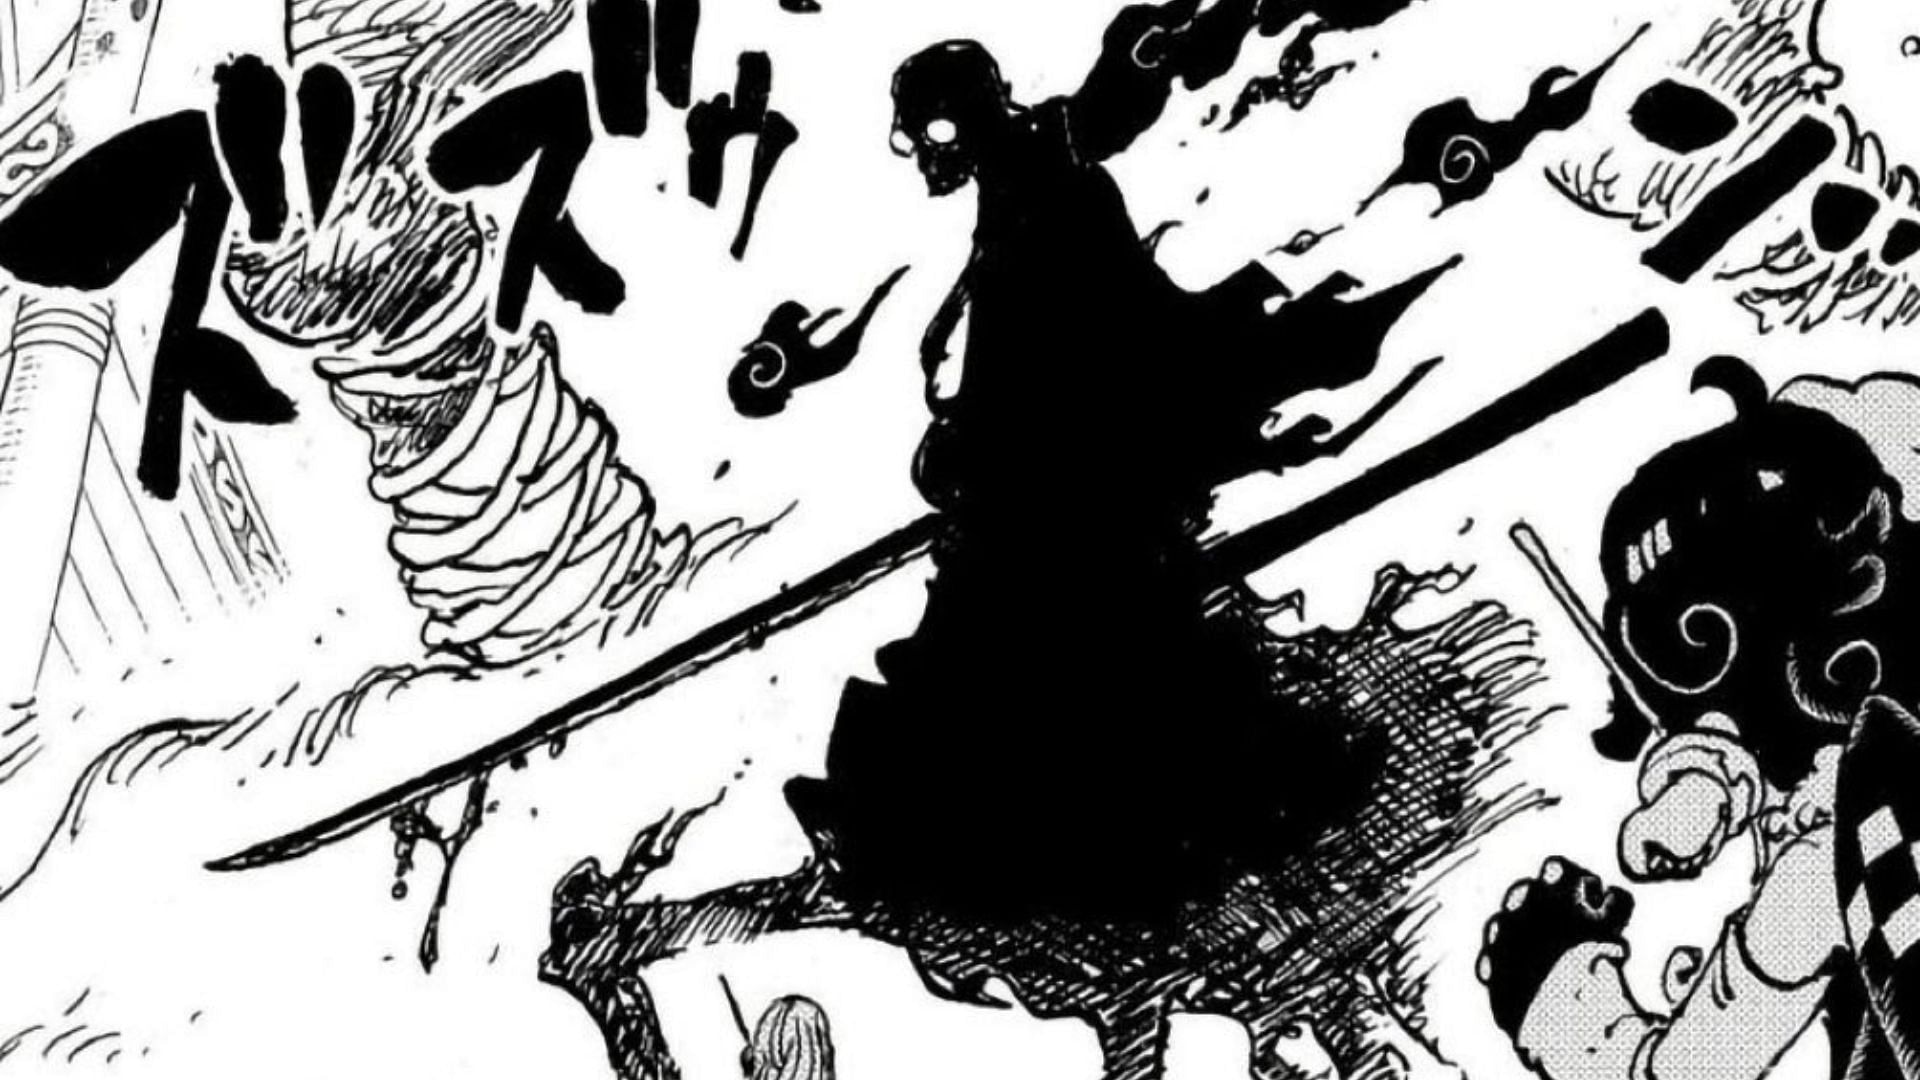 Saint Nusjuro makes a surprising entry in One Piece chapter 1112 (Image via Shueisha)